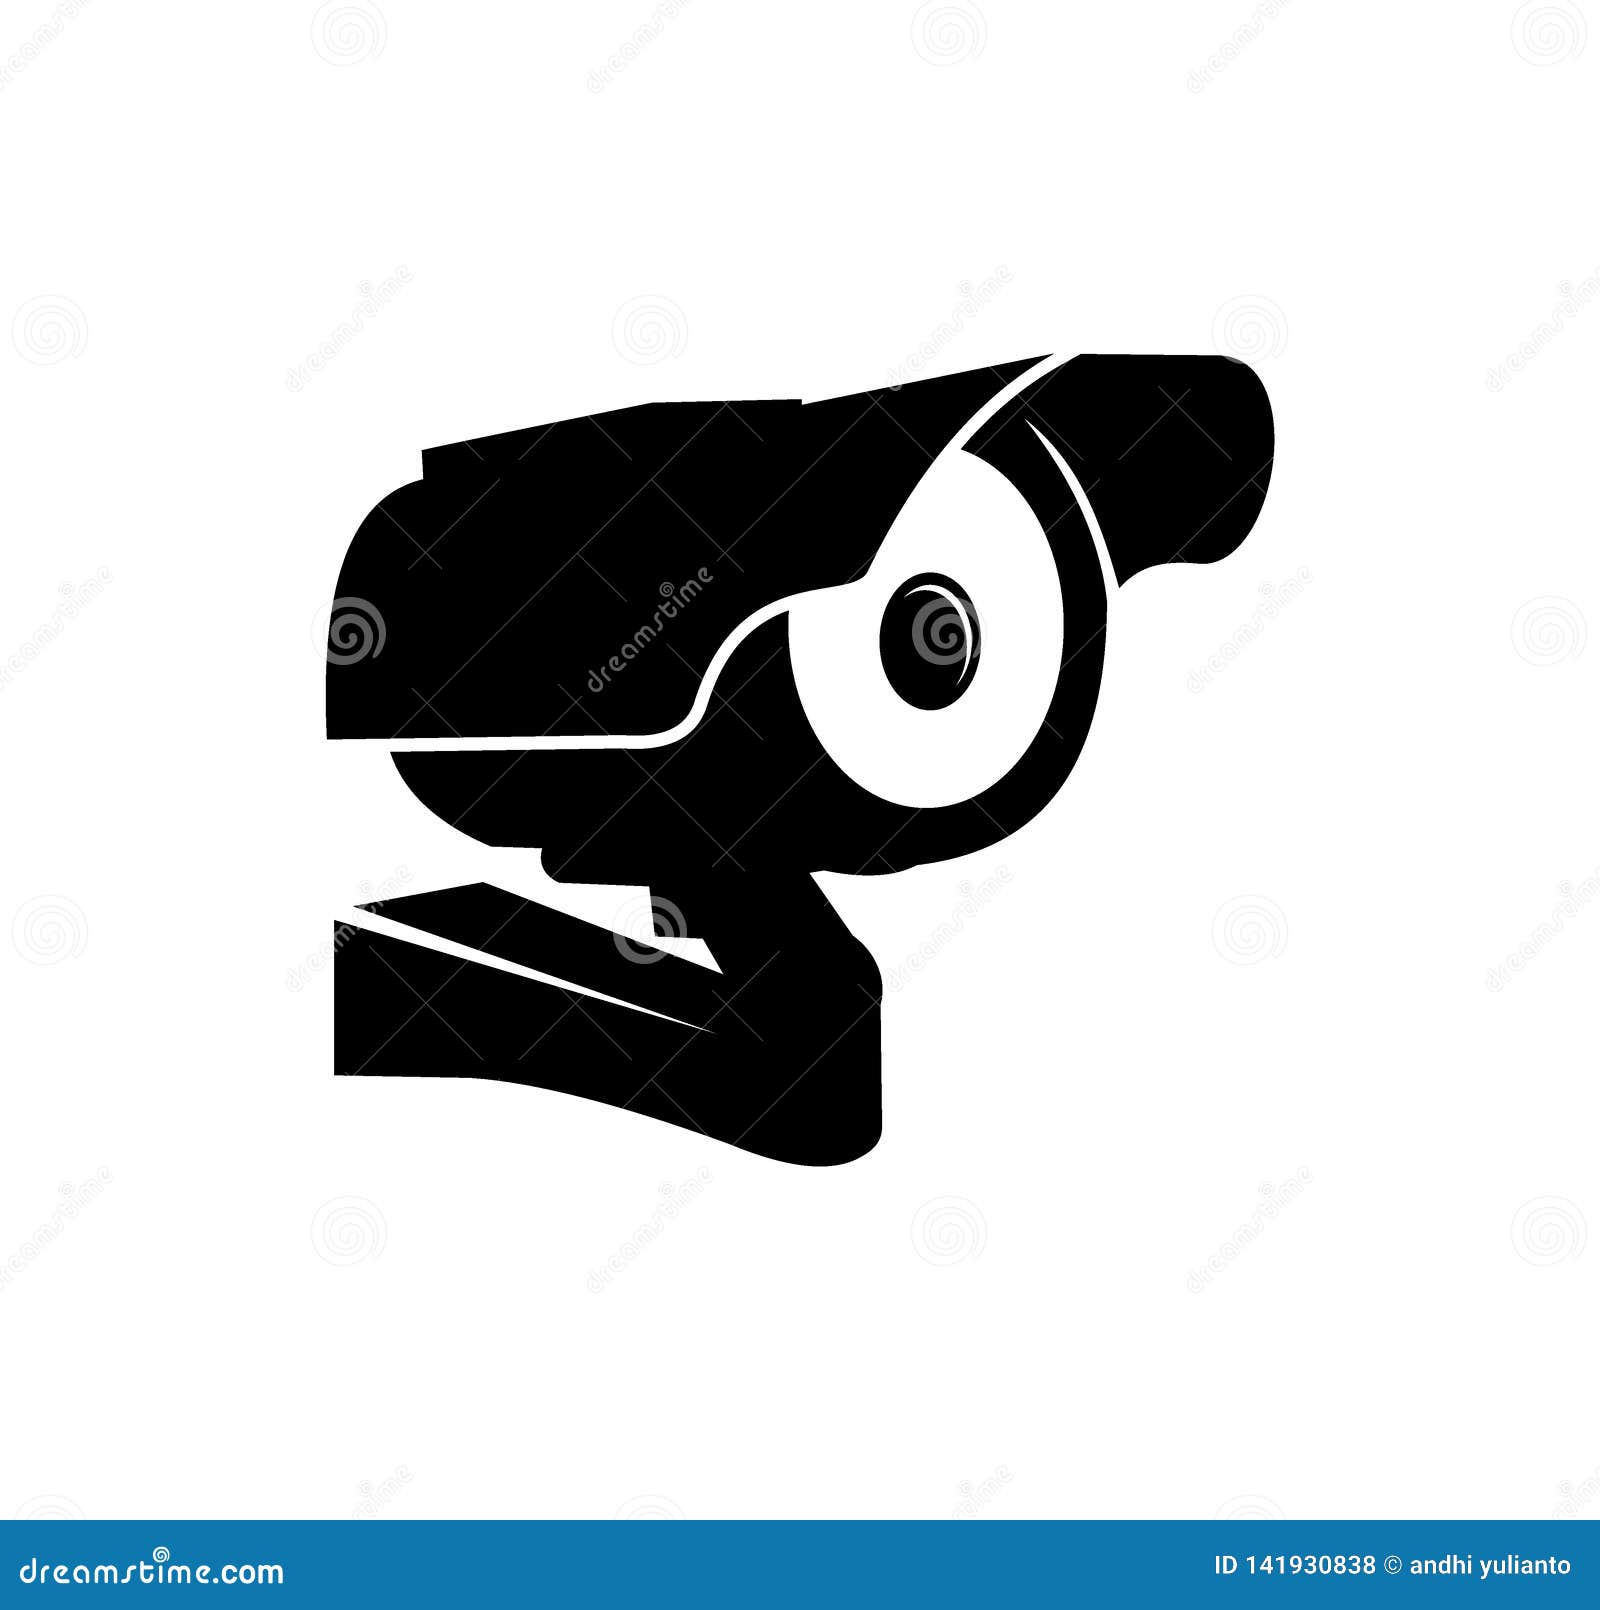 Cctv Cameras Images | Free Photos, PNG Stickers, Wallpapers & Backgrounds -  rawpixel